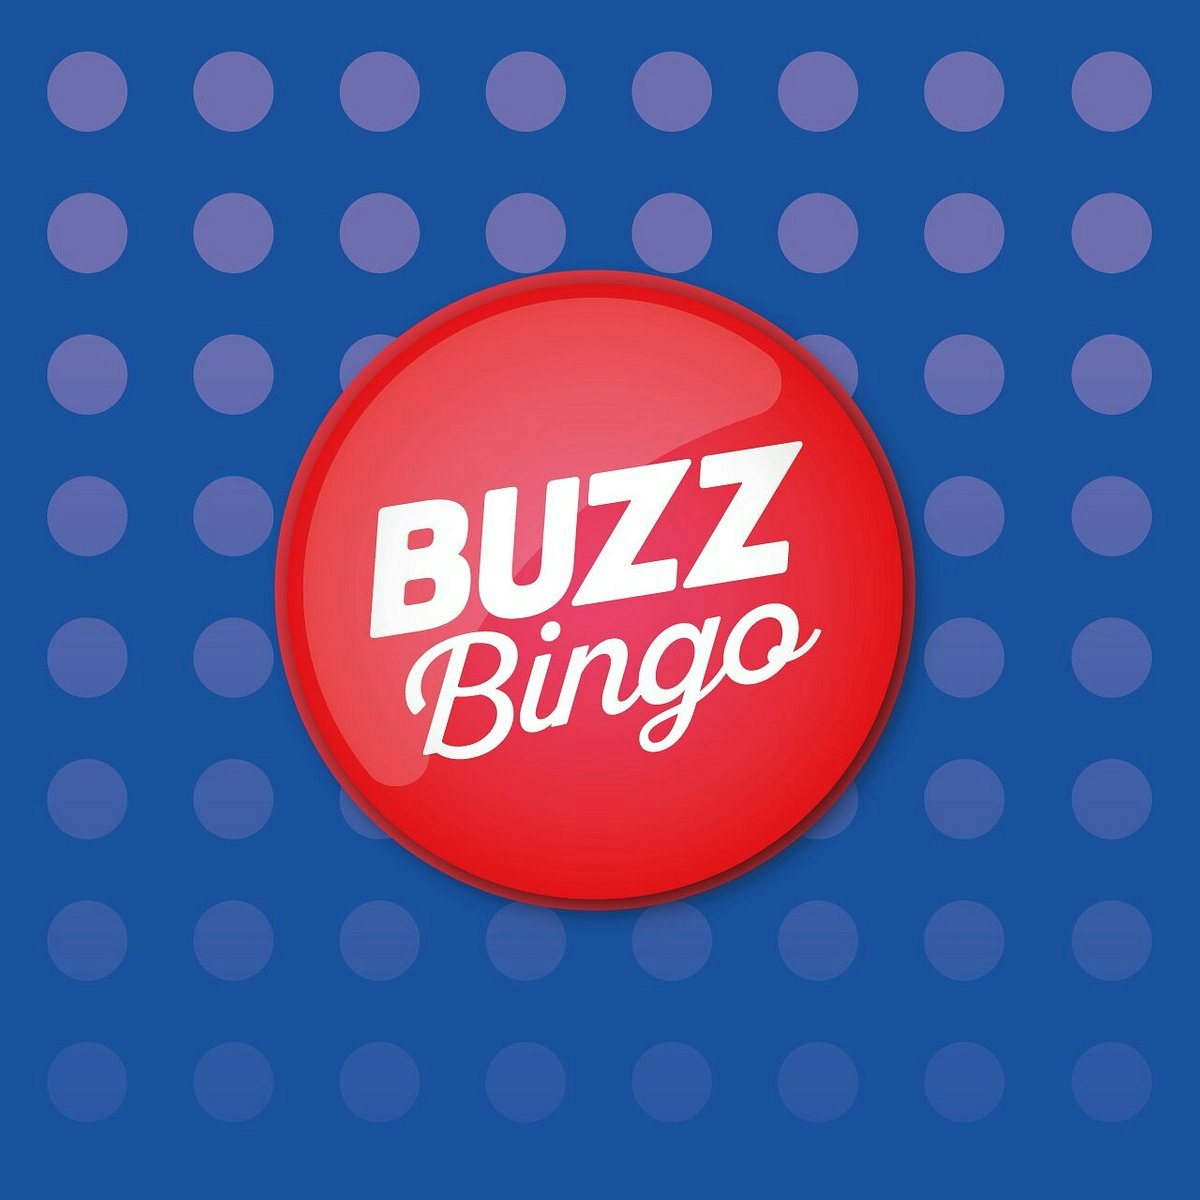 A blue square background with purple dots. Then a red circle with white Buzz Bingo words.